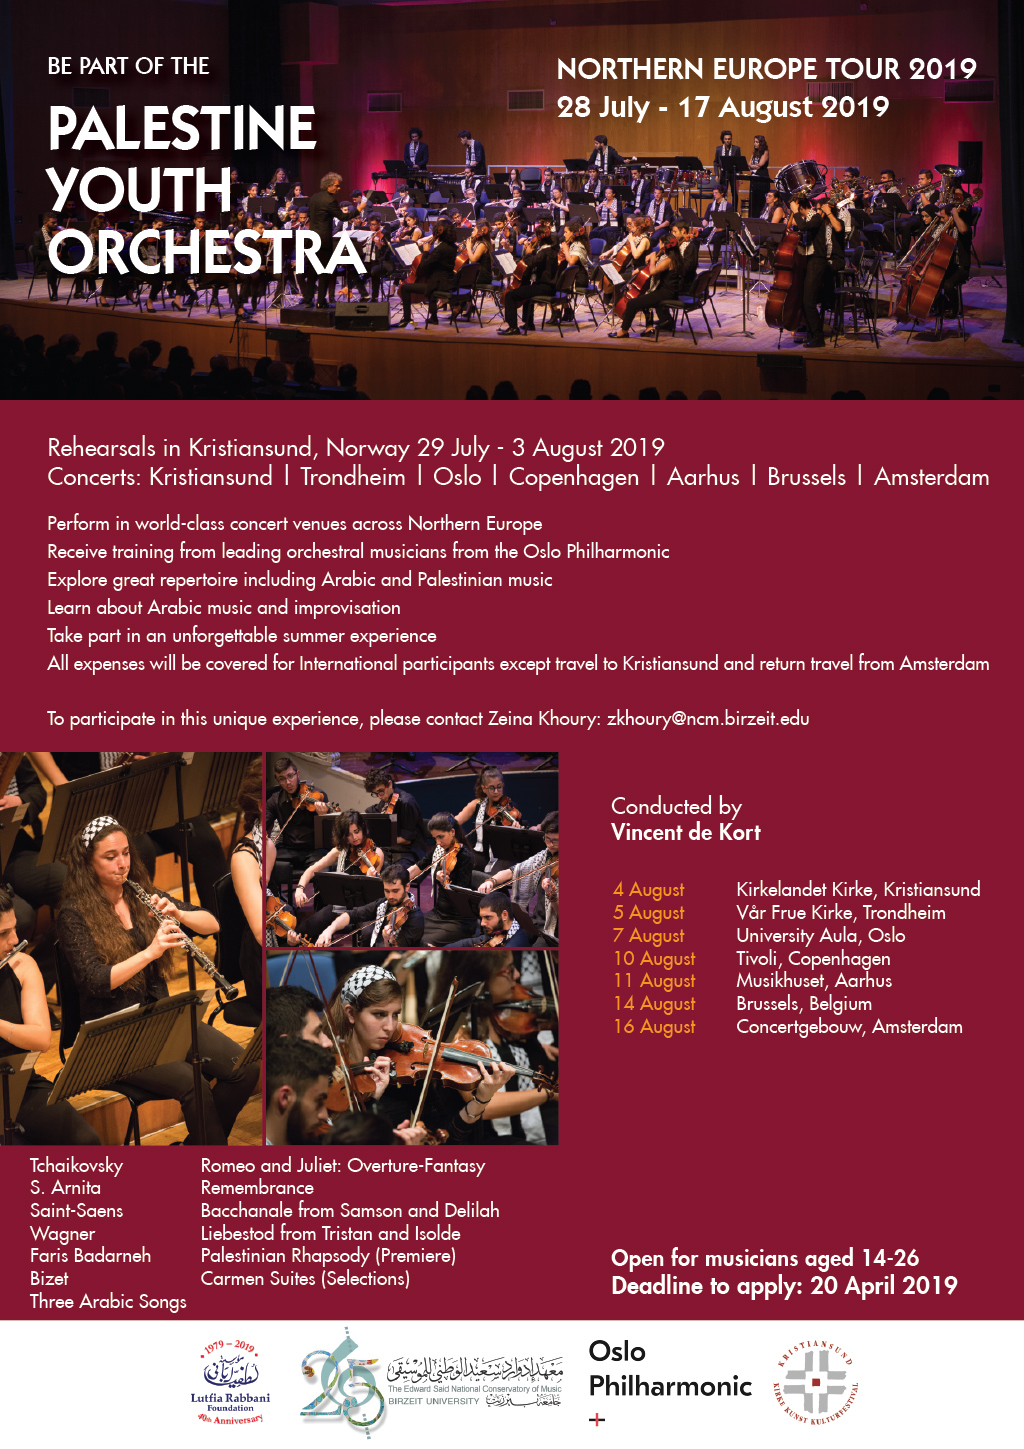 Join the Palestinian Youth Orchestra’s Northern European Tour 2019